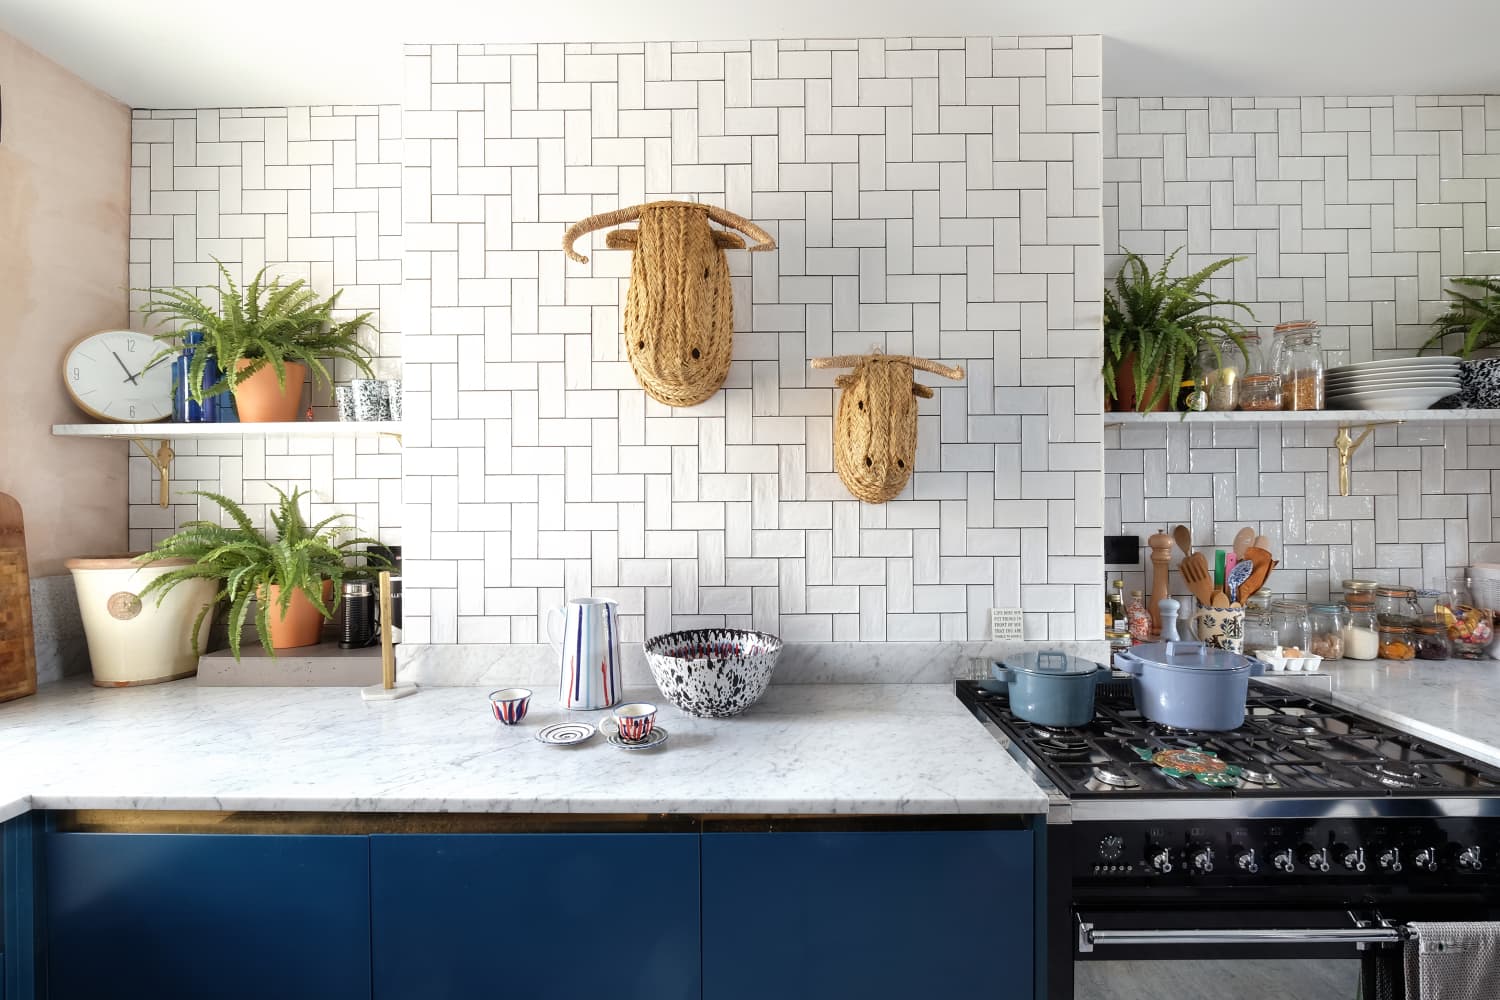 20 backsplash ideas to inspire you | apartment therapy